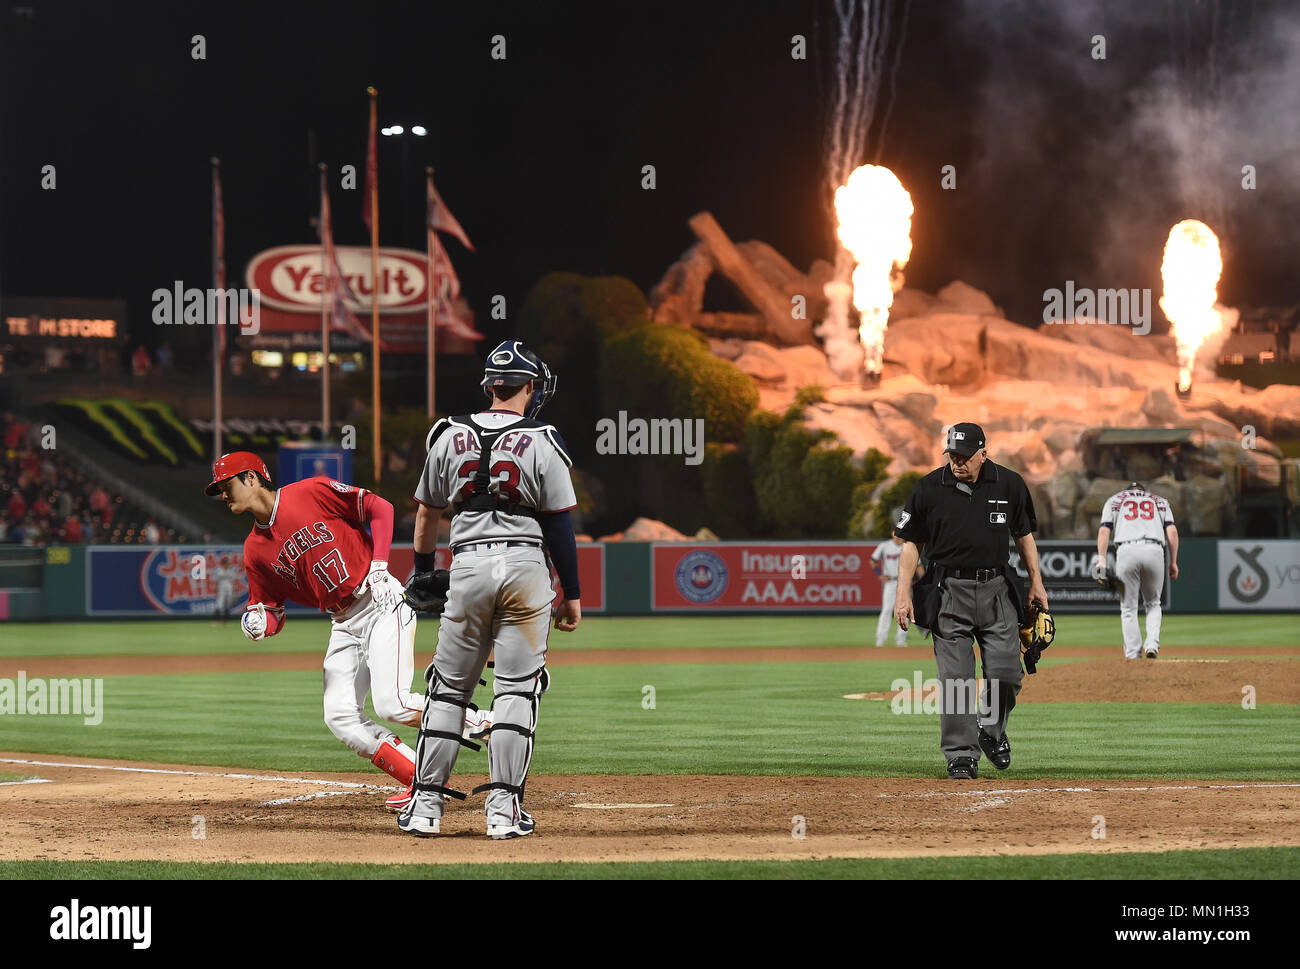 Los Angeles Angels designated hitter Shohei Ohtani (L) crosses home plate  after hitting a solo home run off Minnesota Twins pitcher Trevor  Hildenberger in the seventh inning as Minnesota Twins catcher Mitch